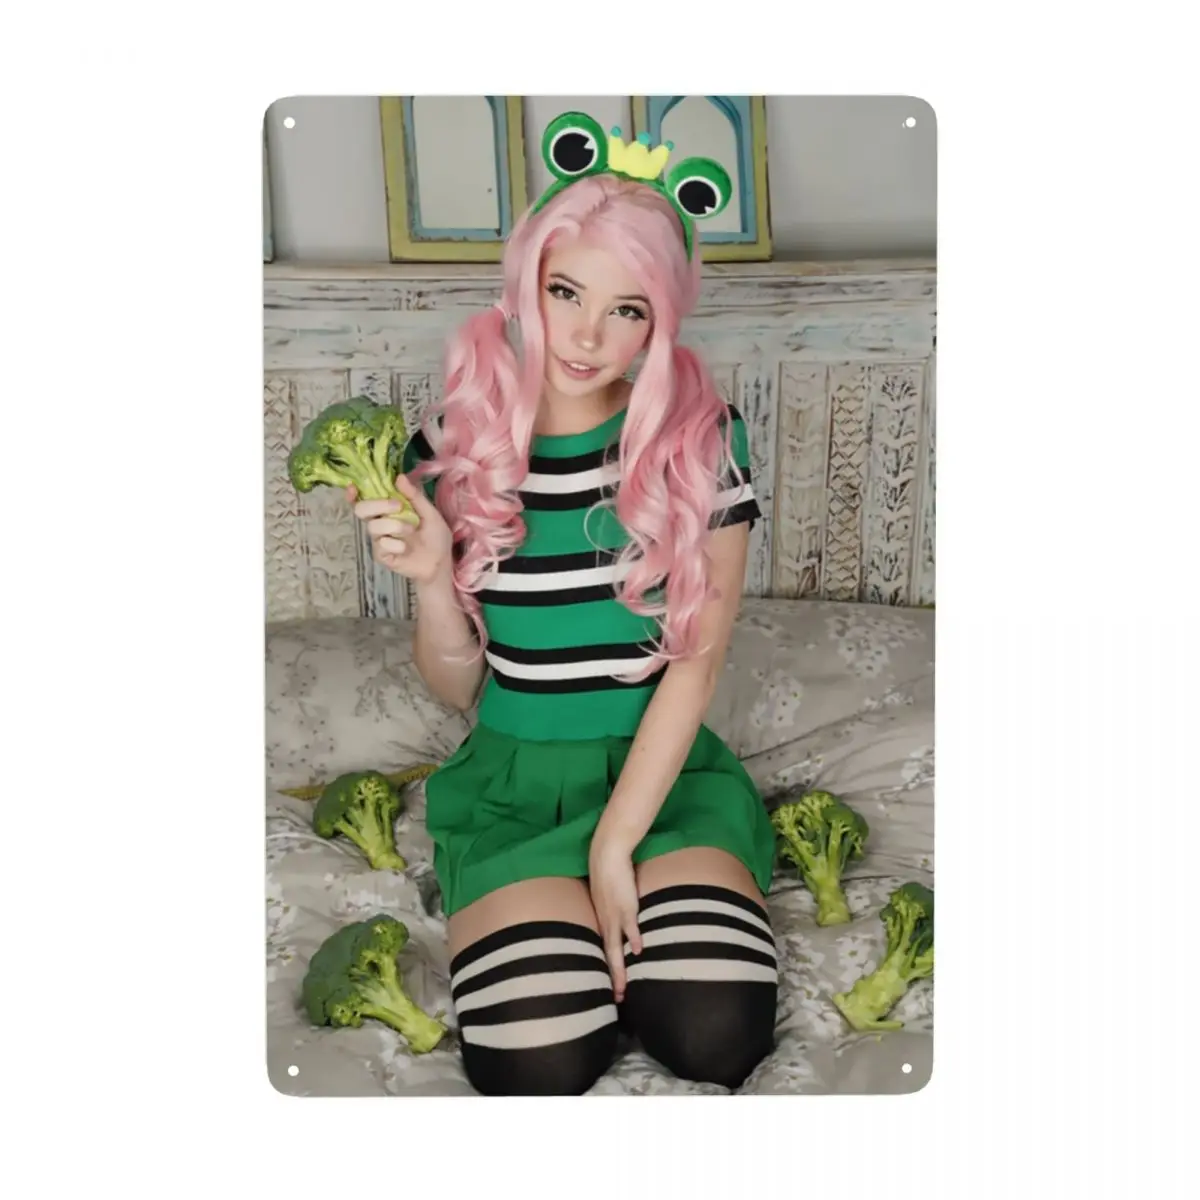 2021 Belle Delphine “Temptress 7 CCC Graded 10 OnlyFans Collectible Trading  Card